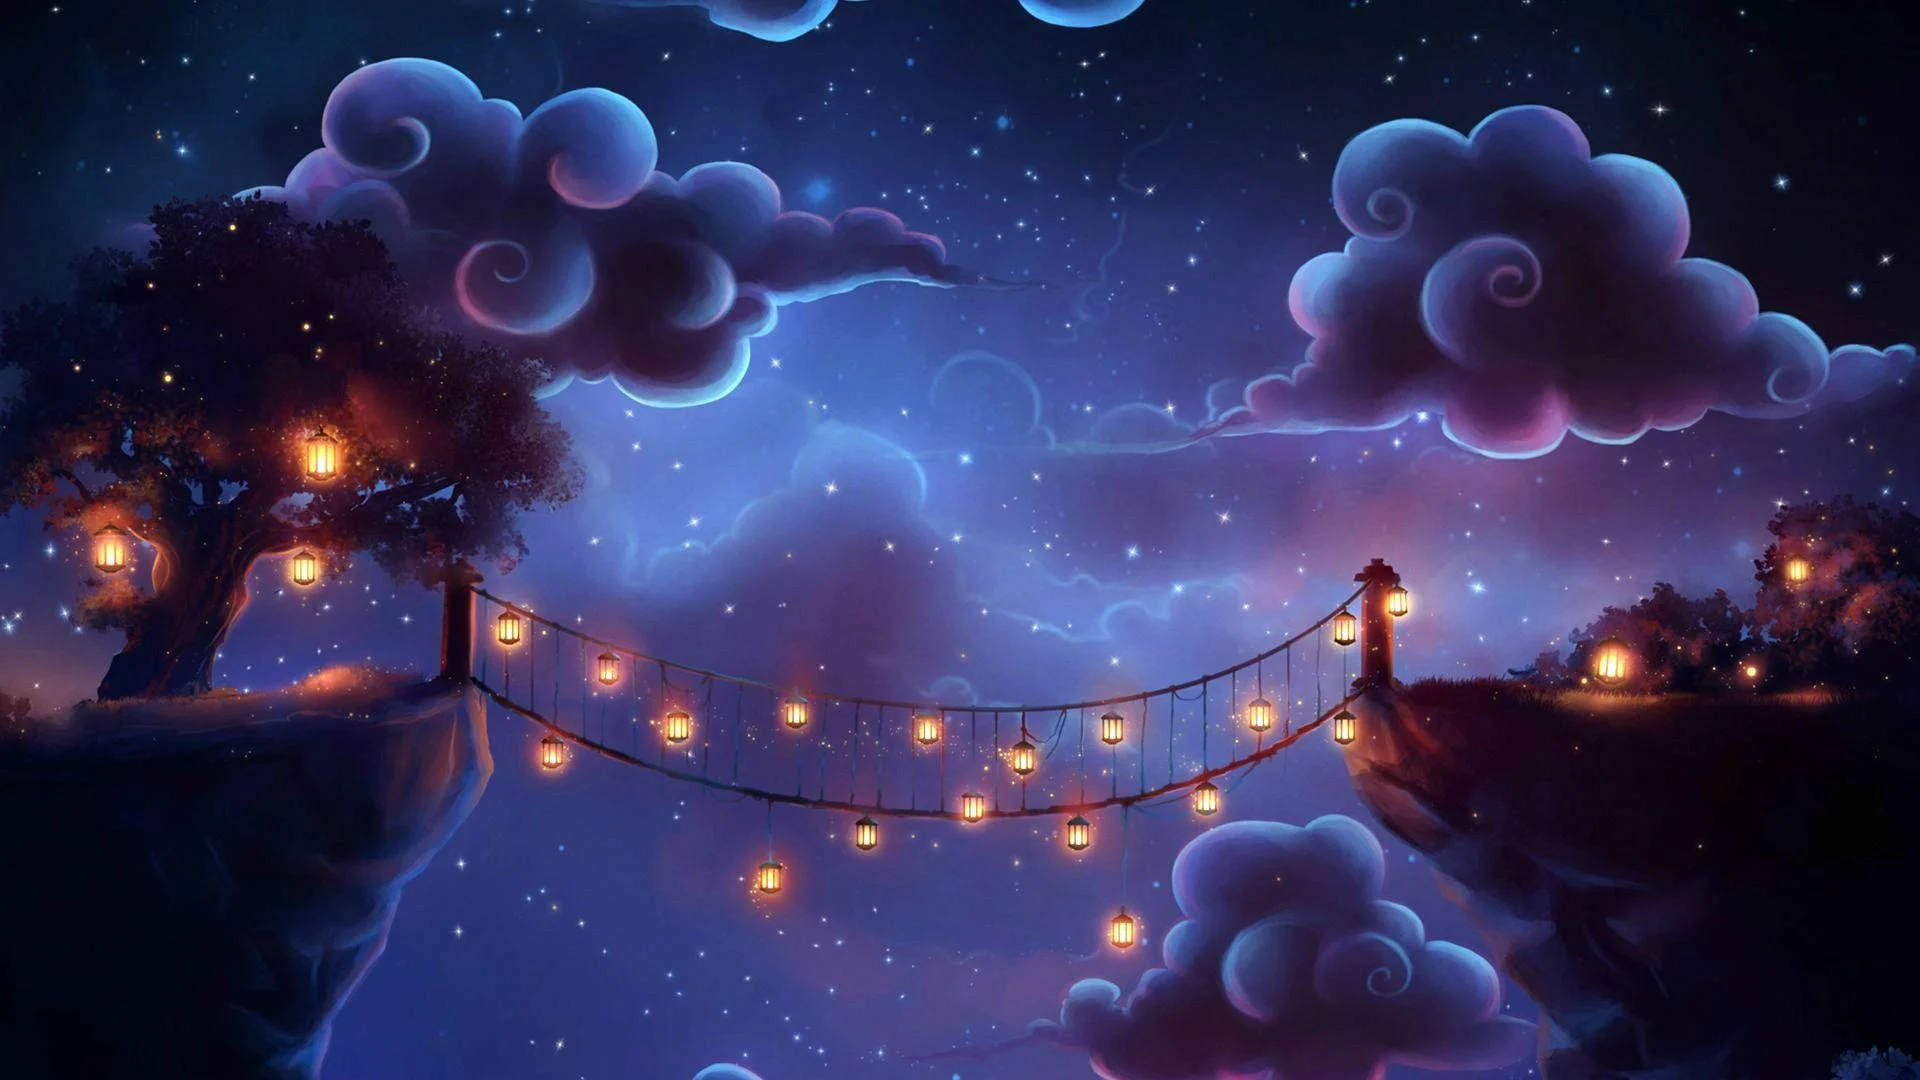 Caption: Enchanting Night View Of A Whimsical Bridge Background